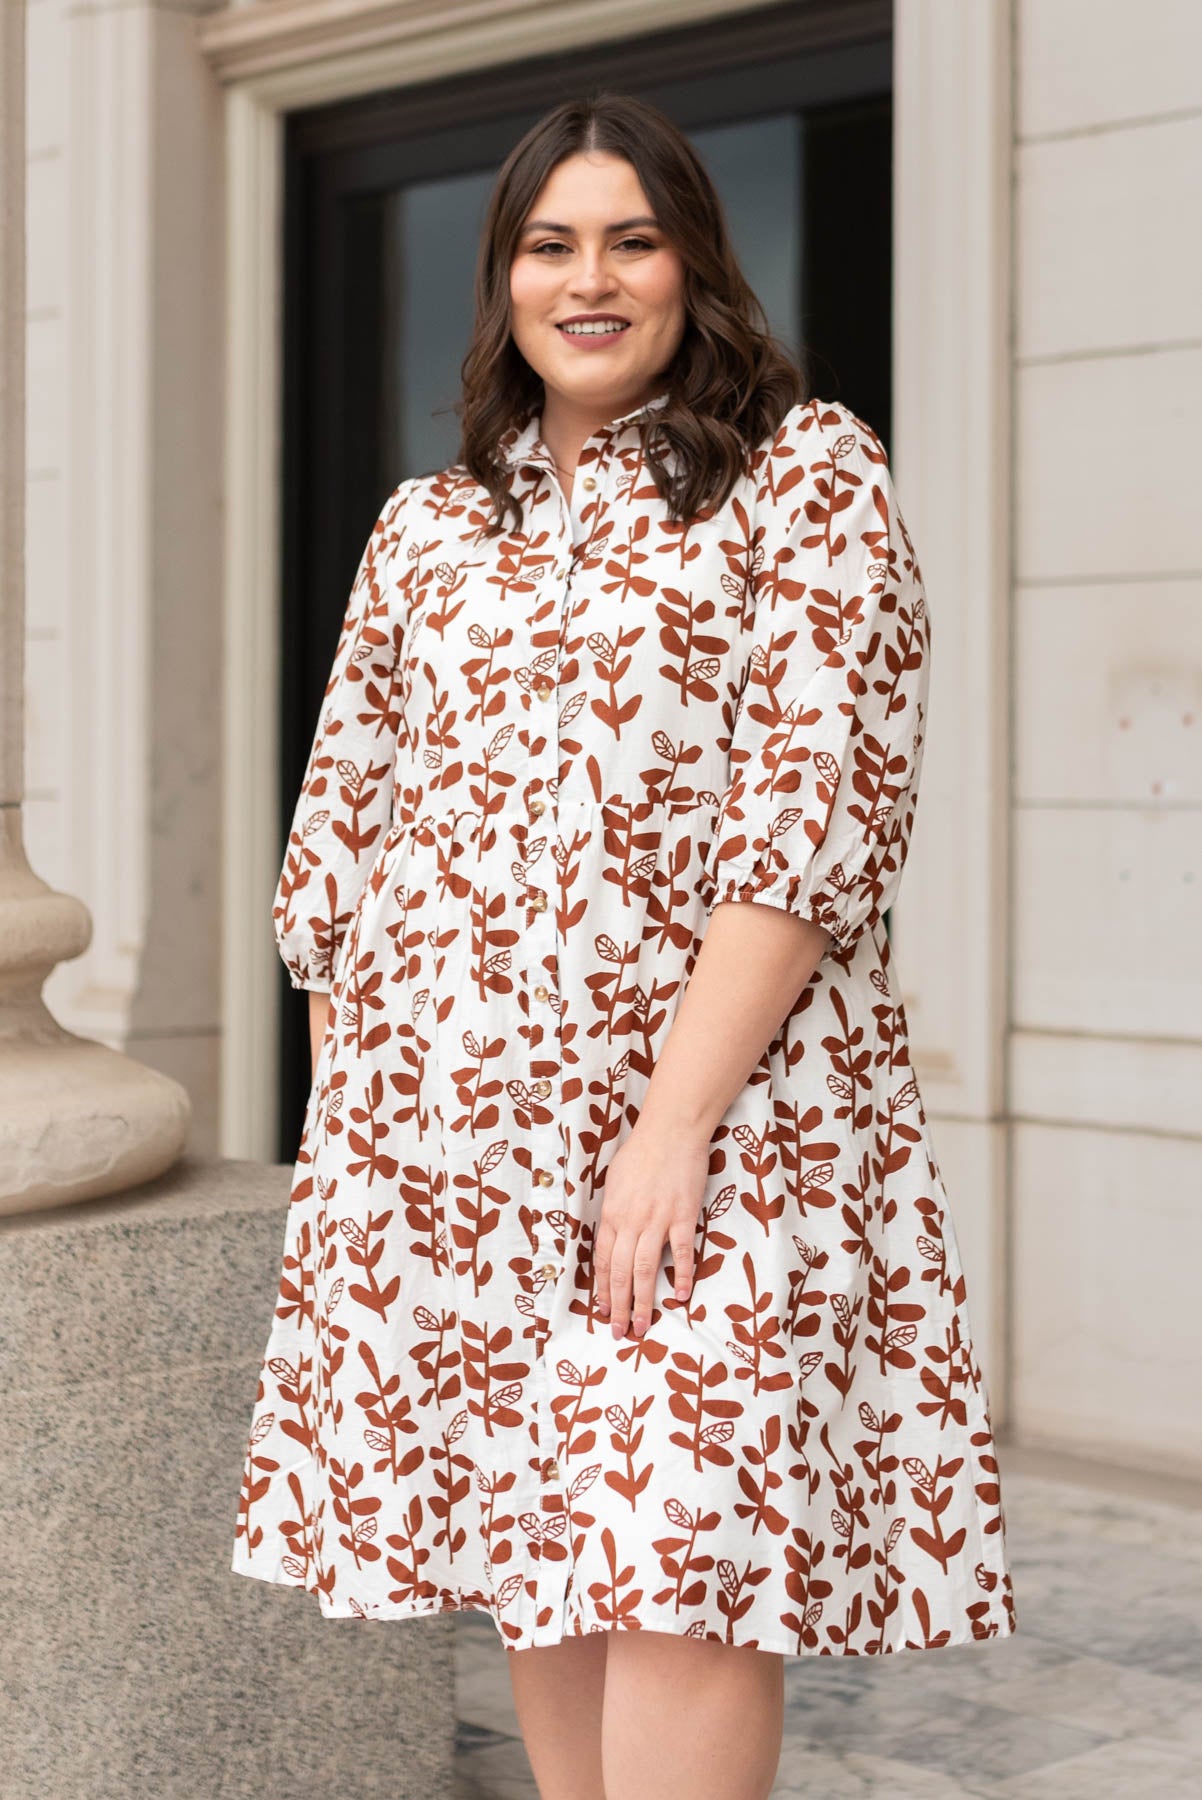 Brown floral dress with 3/4 sleeves and tiered skirt